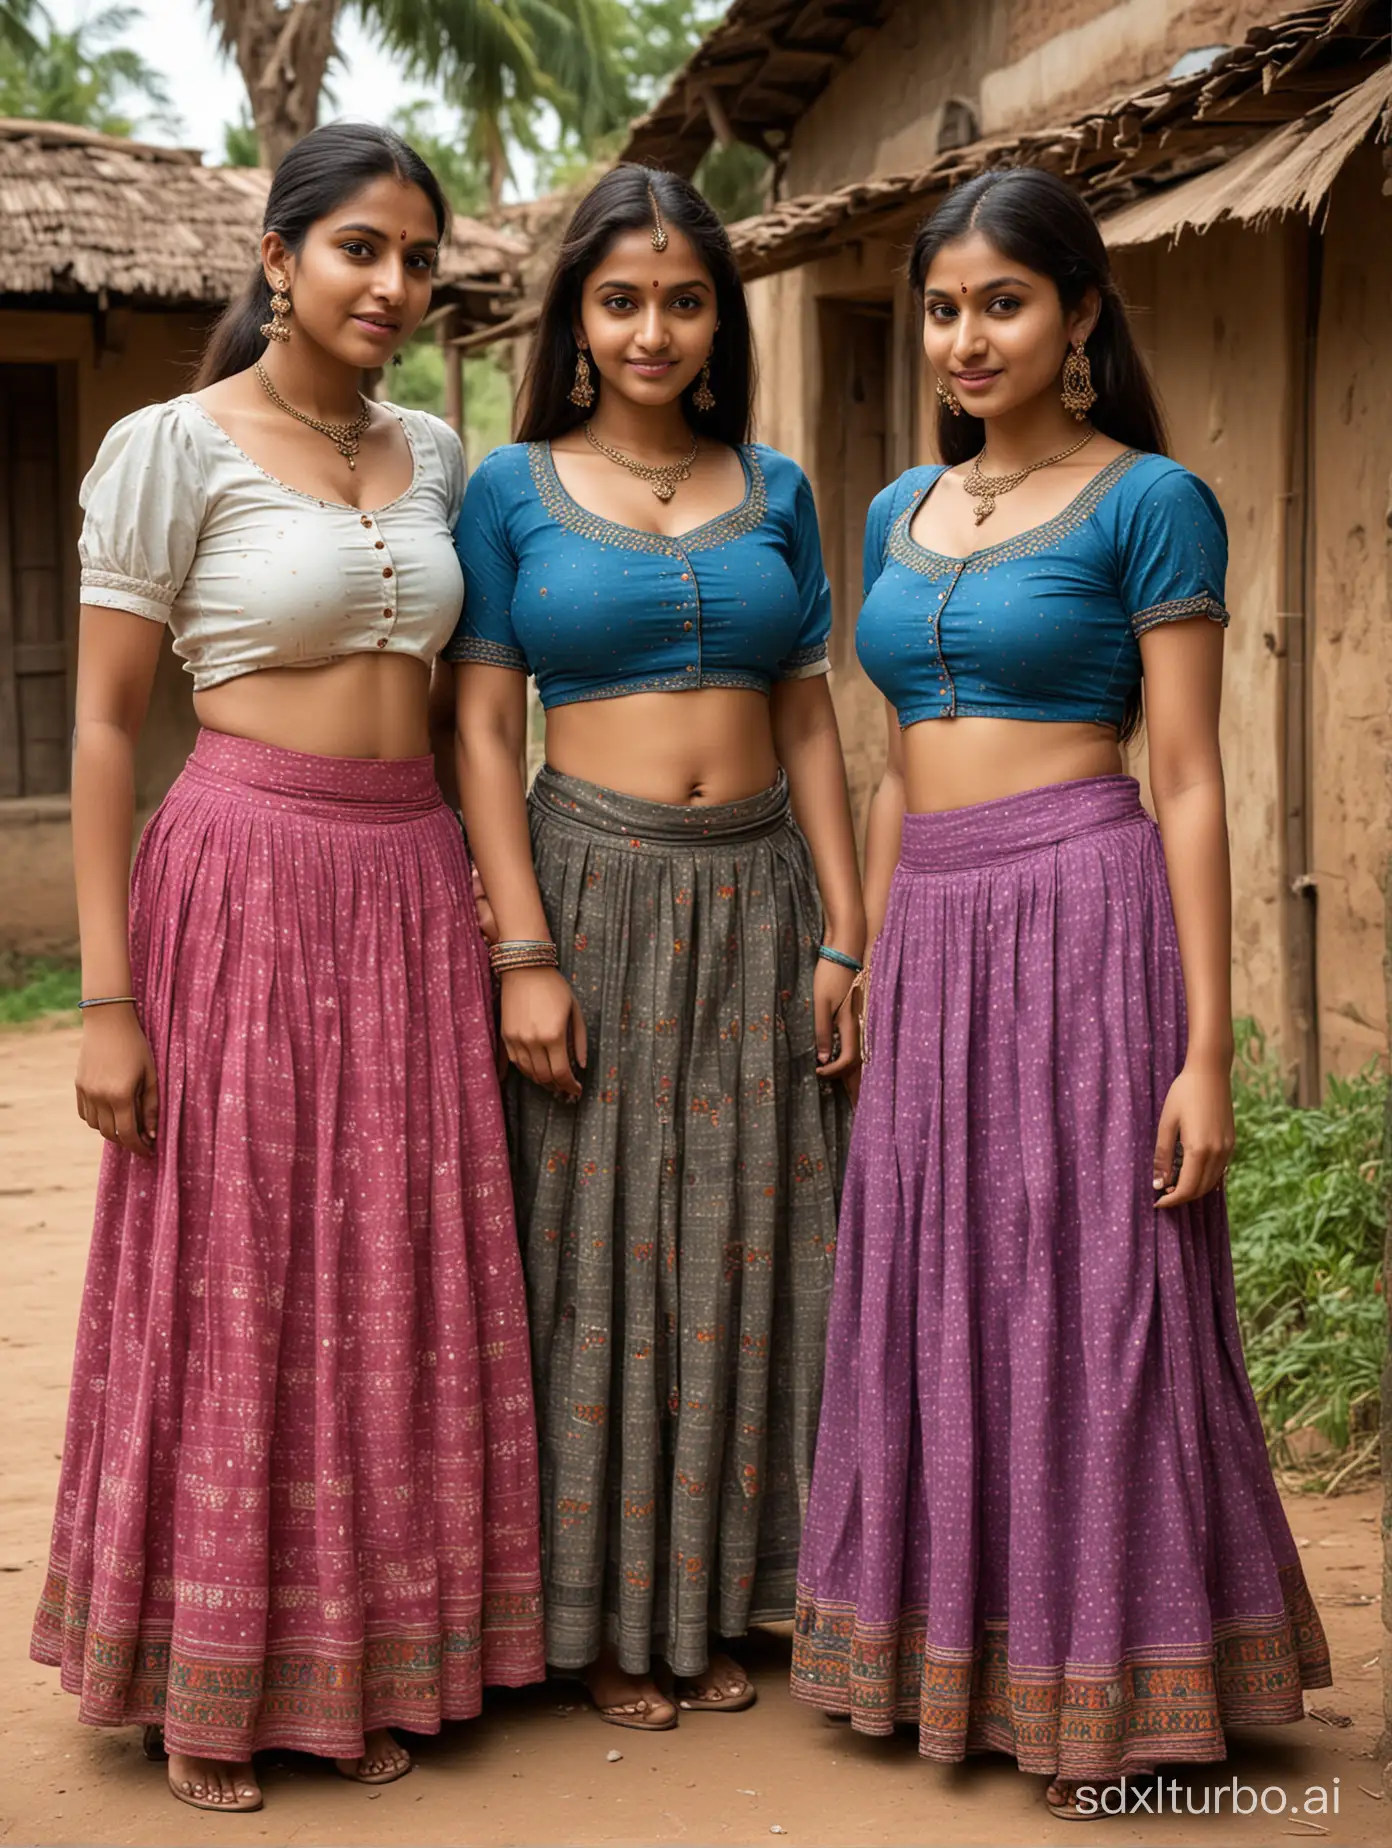 Indian 3 busty girls realistic photograph of three young rustic village belle dressed in an unhooked blouse and Indian skirt .